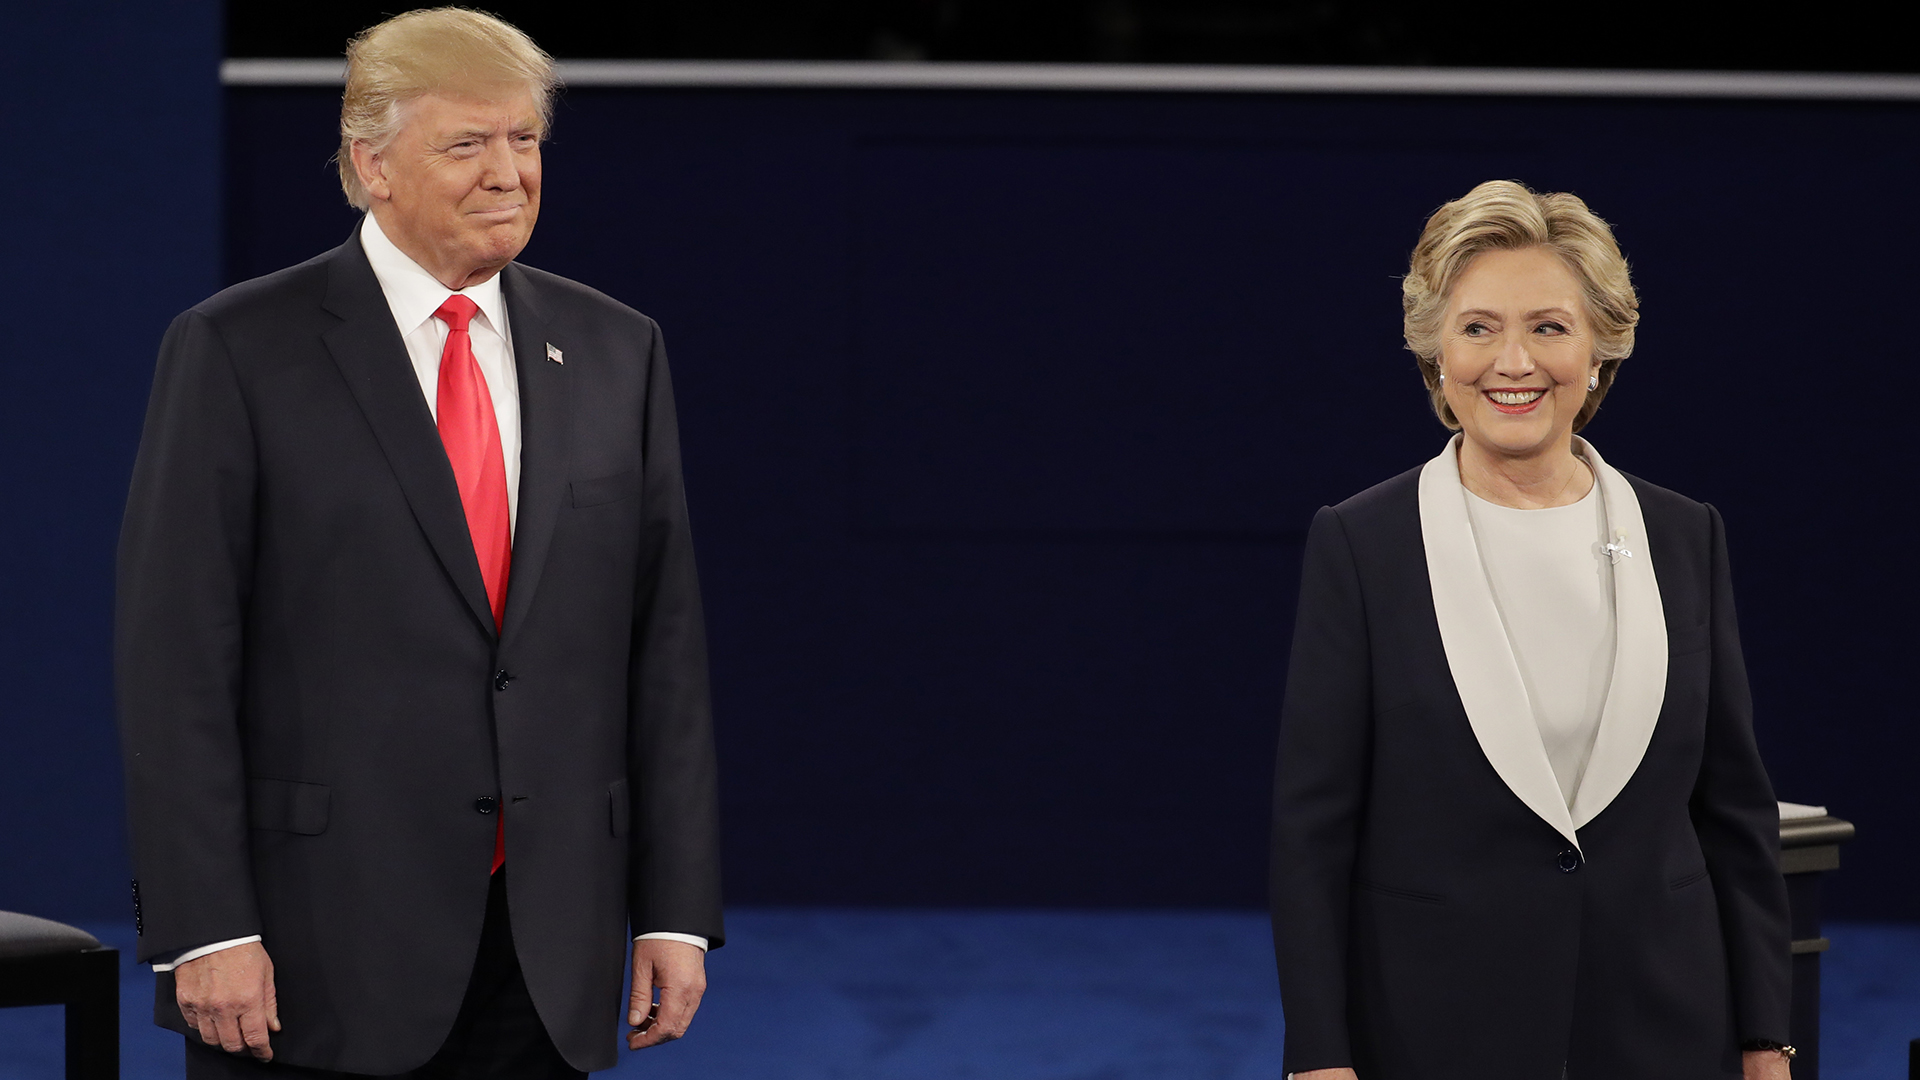 Republican presidential nominee Donald Trump stands next to Democratic presidential nominee Hillary Clinton during the second presidential debate at Washington University in St. Louis, Sunday, Oct. 9, 2016. (AP Photo/Julio Cortez)